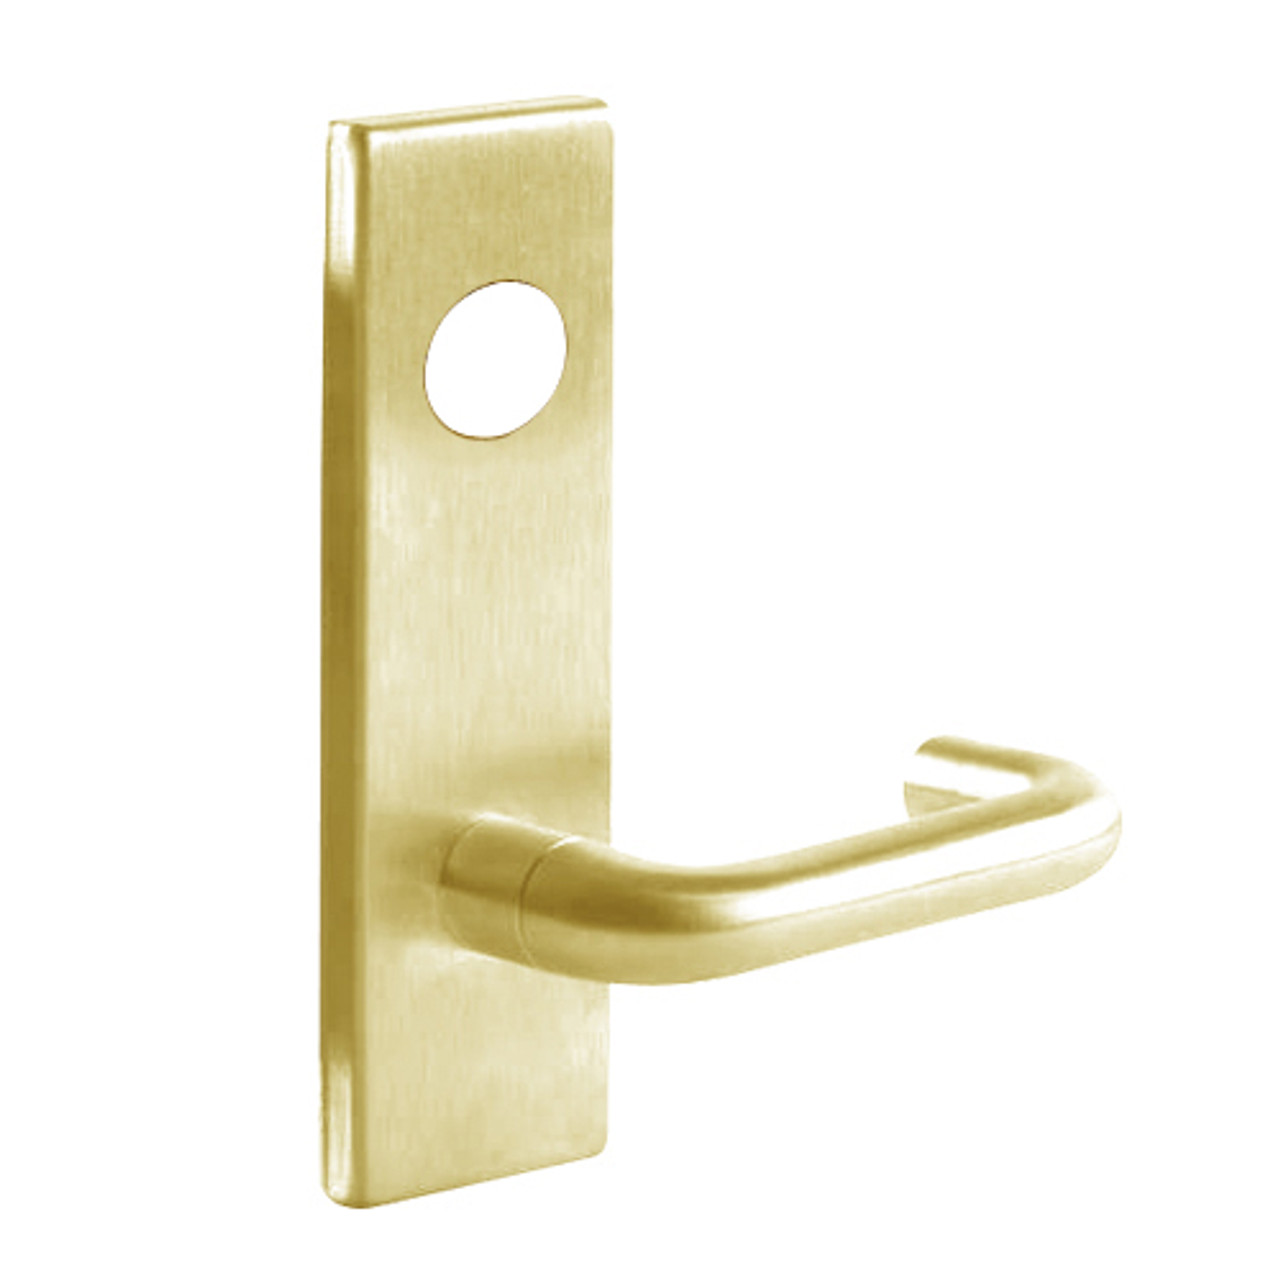 L9026J-03N-606 Schlage L Series Exit Lock with Cylinder Commercial Mortise Lock with 03 Cast Lever Design Prepped for FSIC in Satin Brass